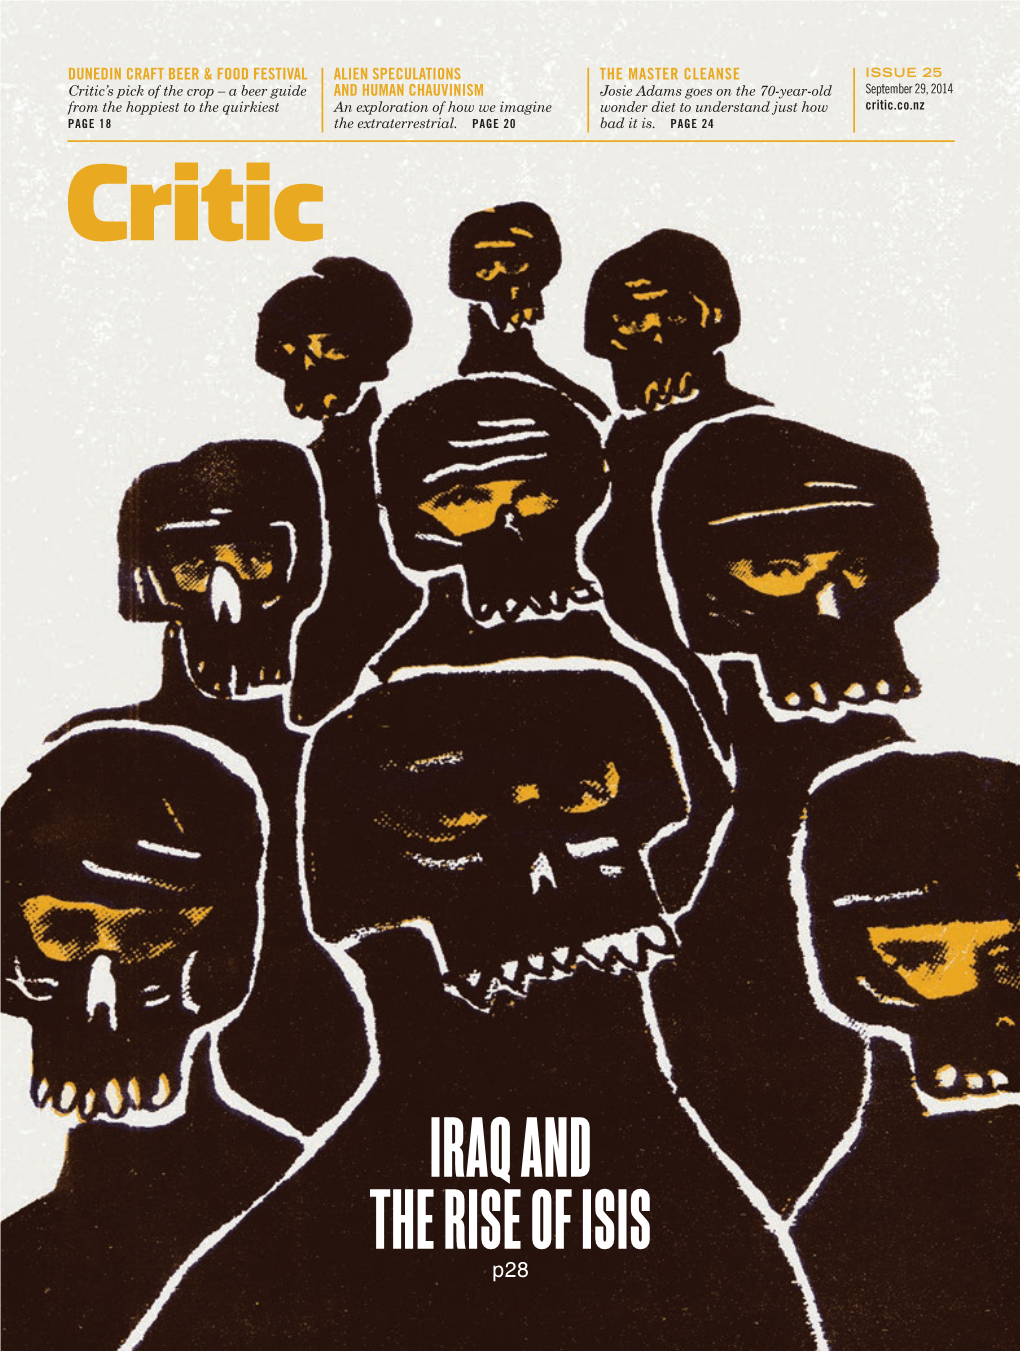 Iraq and the Rise of ISIS P28 Issue 25 September 29, 2014